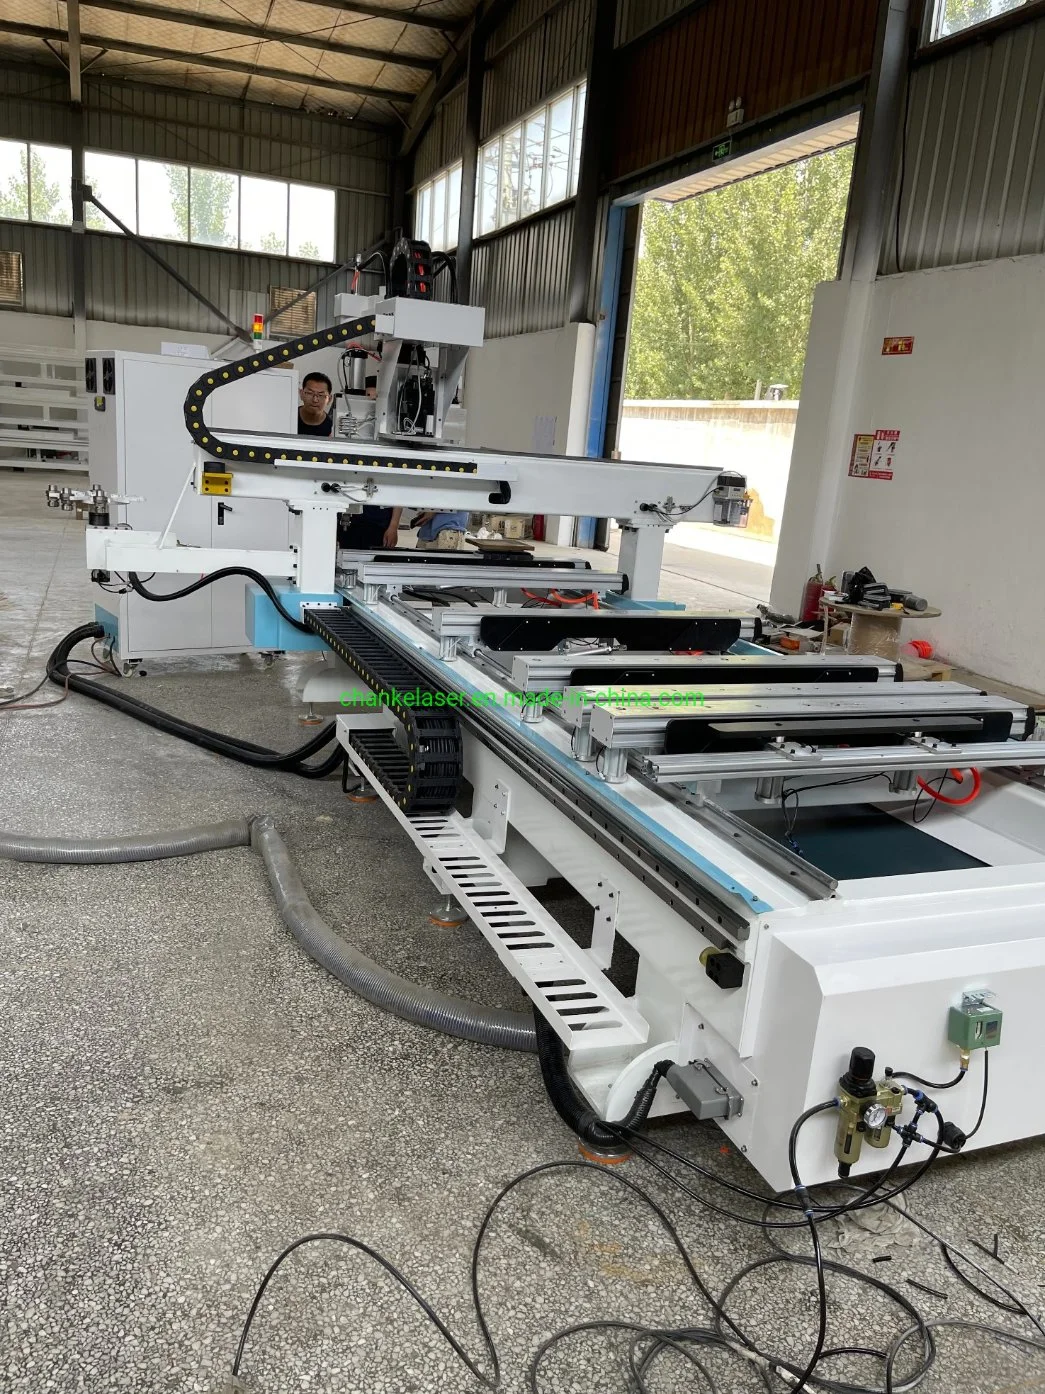 CNC Wooden Door Locking CNC Router Machine Engraving Machining Center 3D Wood Working Cutting Drilling Engraver Table Legs CNC Mechanical Woodworking Machinery